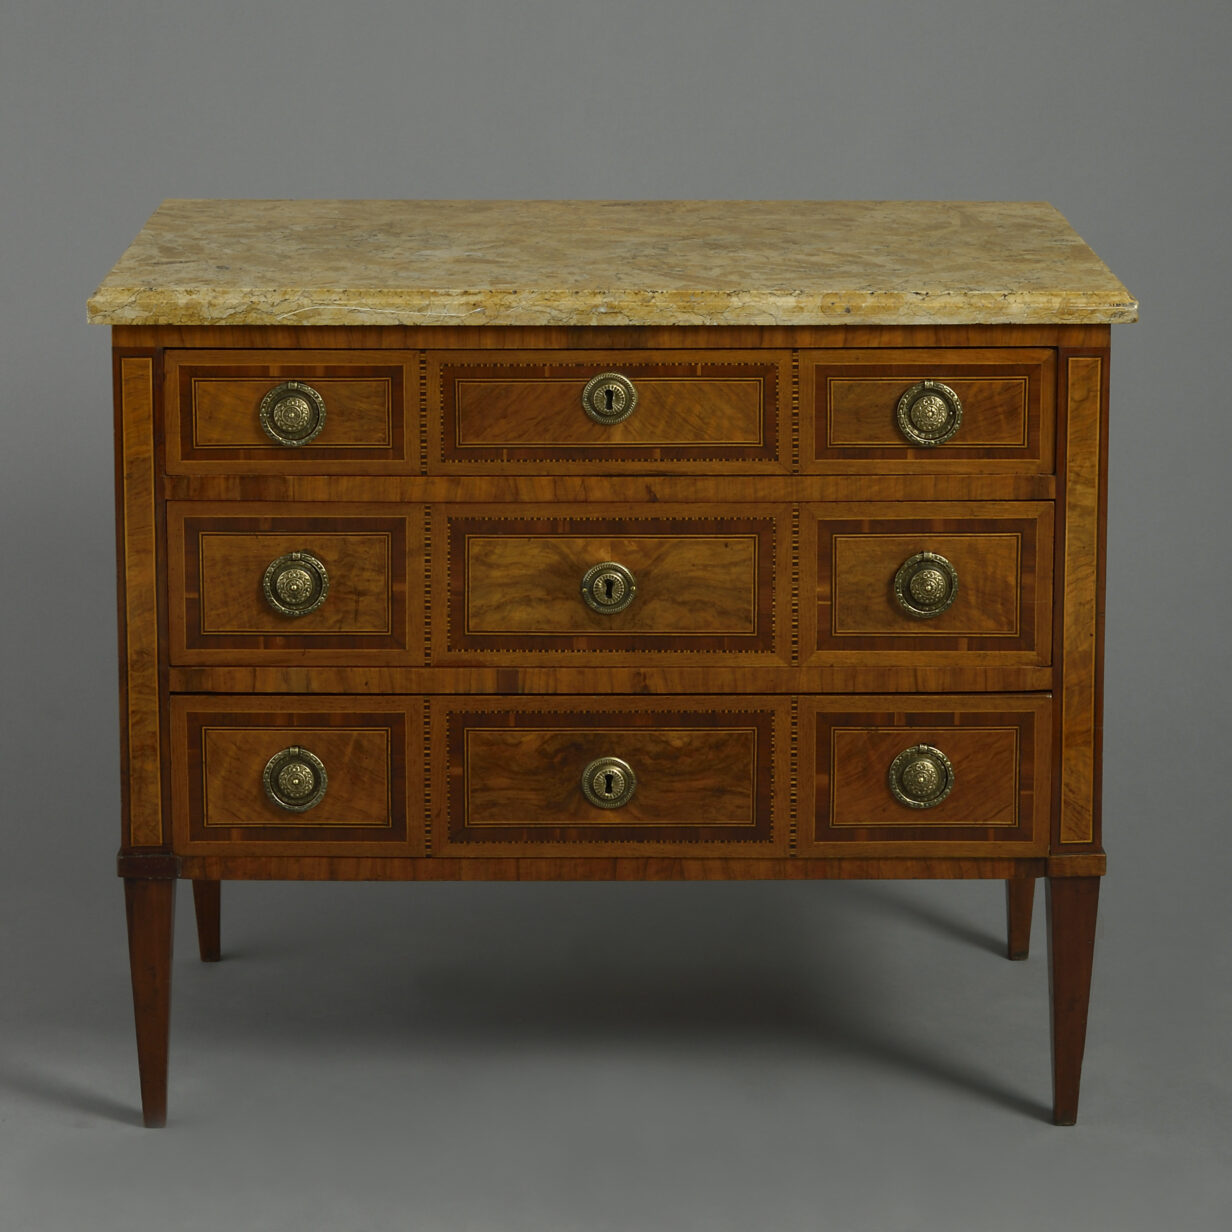 Late 18th century neo-classical commode